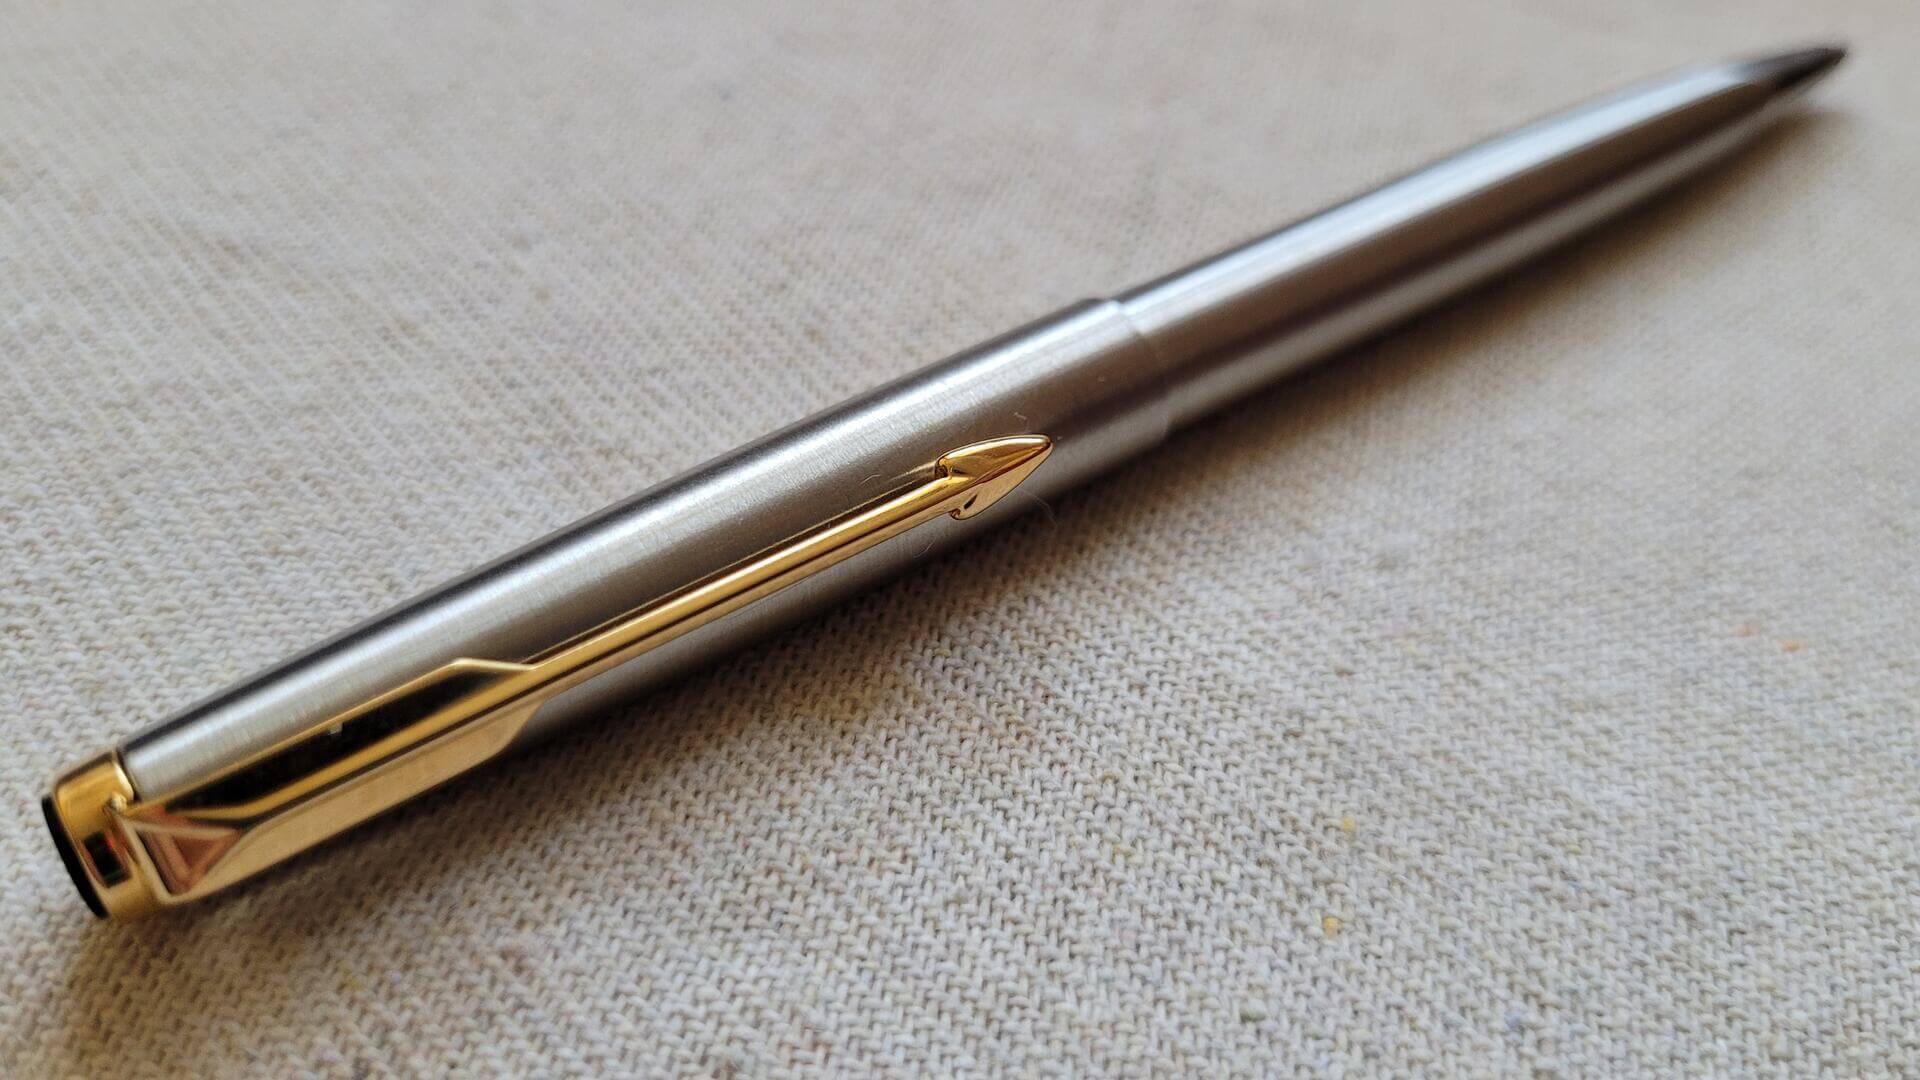 Beautiful classic chrome Parker Falcon cap actuated ballpoint pen with golden arrow clip and nice unique design transition from brushed barrel to polished steel tip. Rare vintage made in USA collectible writing equipment